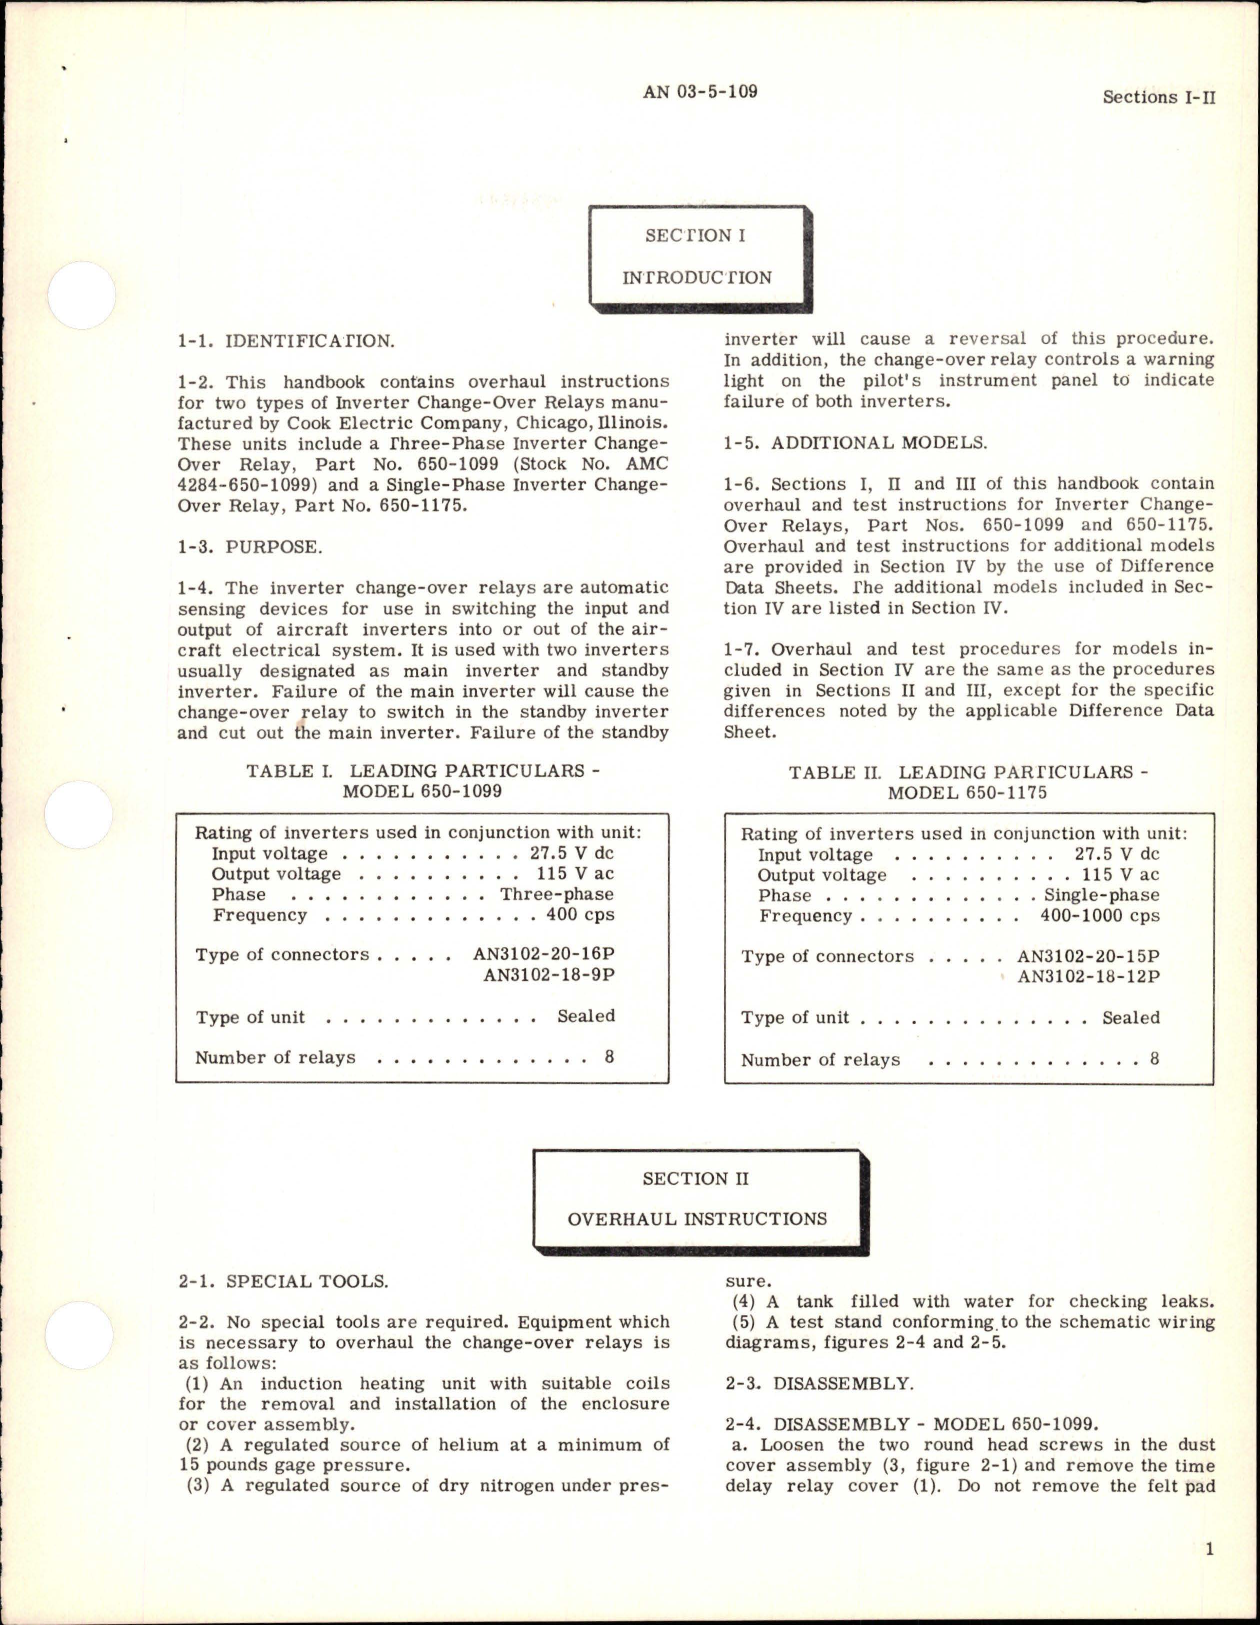 Sample page 5 from AirCorps Library document: Overhaul Instructions for Inverter Change-Over Relays - Models 650-1099, 650-1175, 650-1740, and 650-4018 